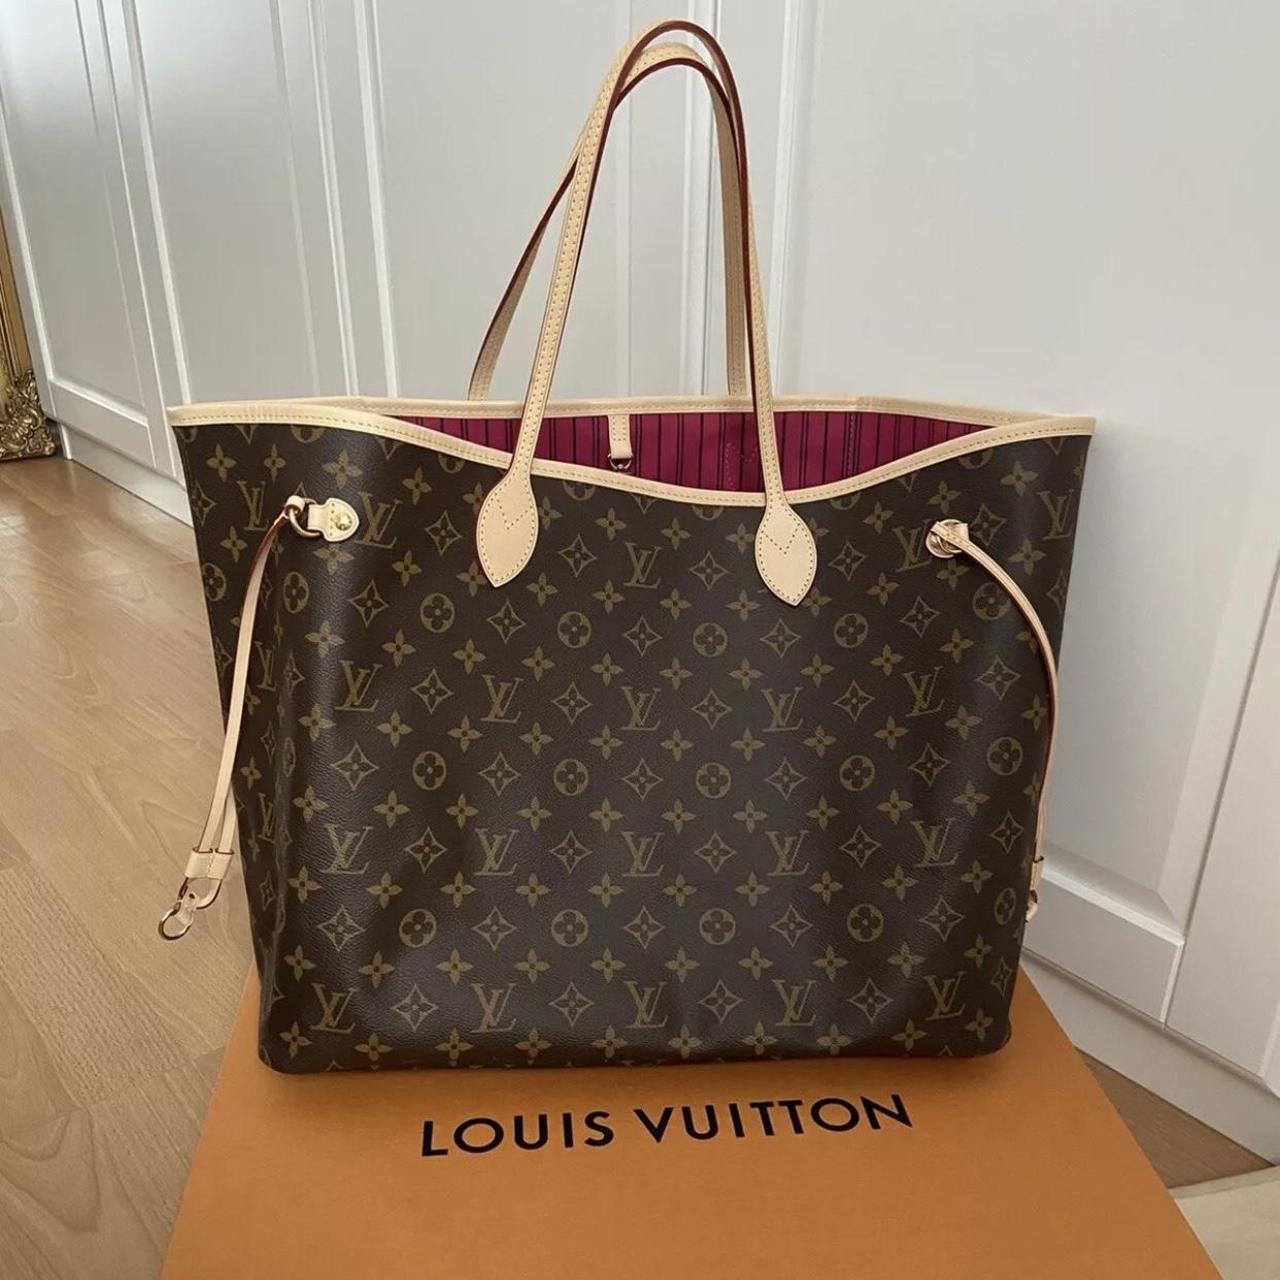 Louis Vuitton Neverfull Monogram MM Here’s is one... - Depop